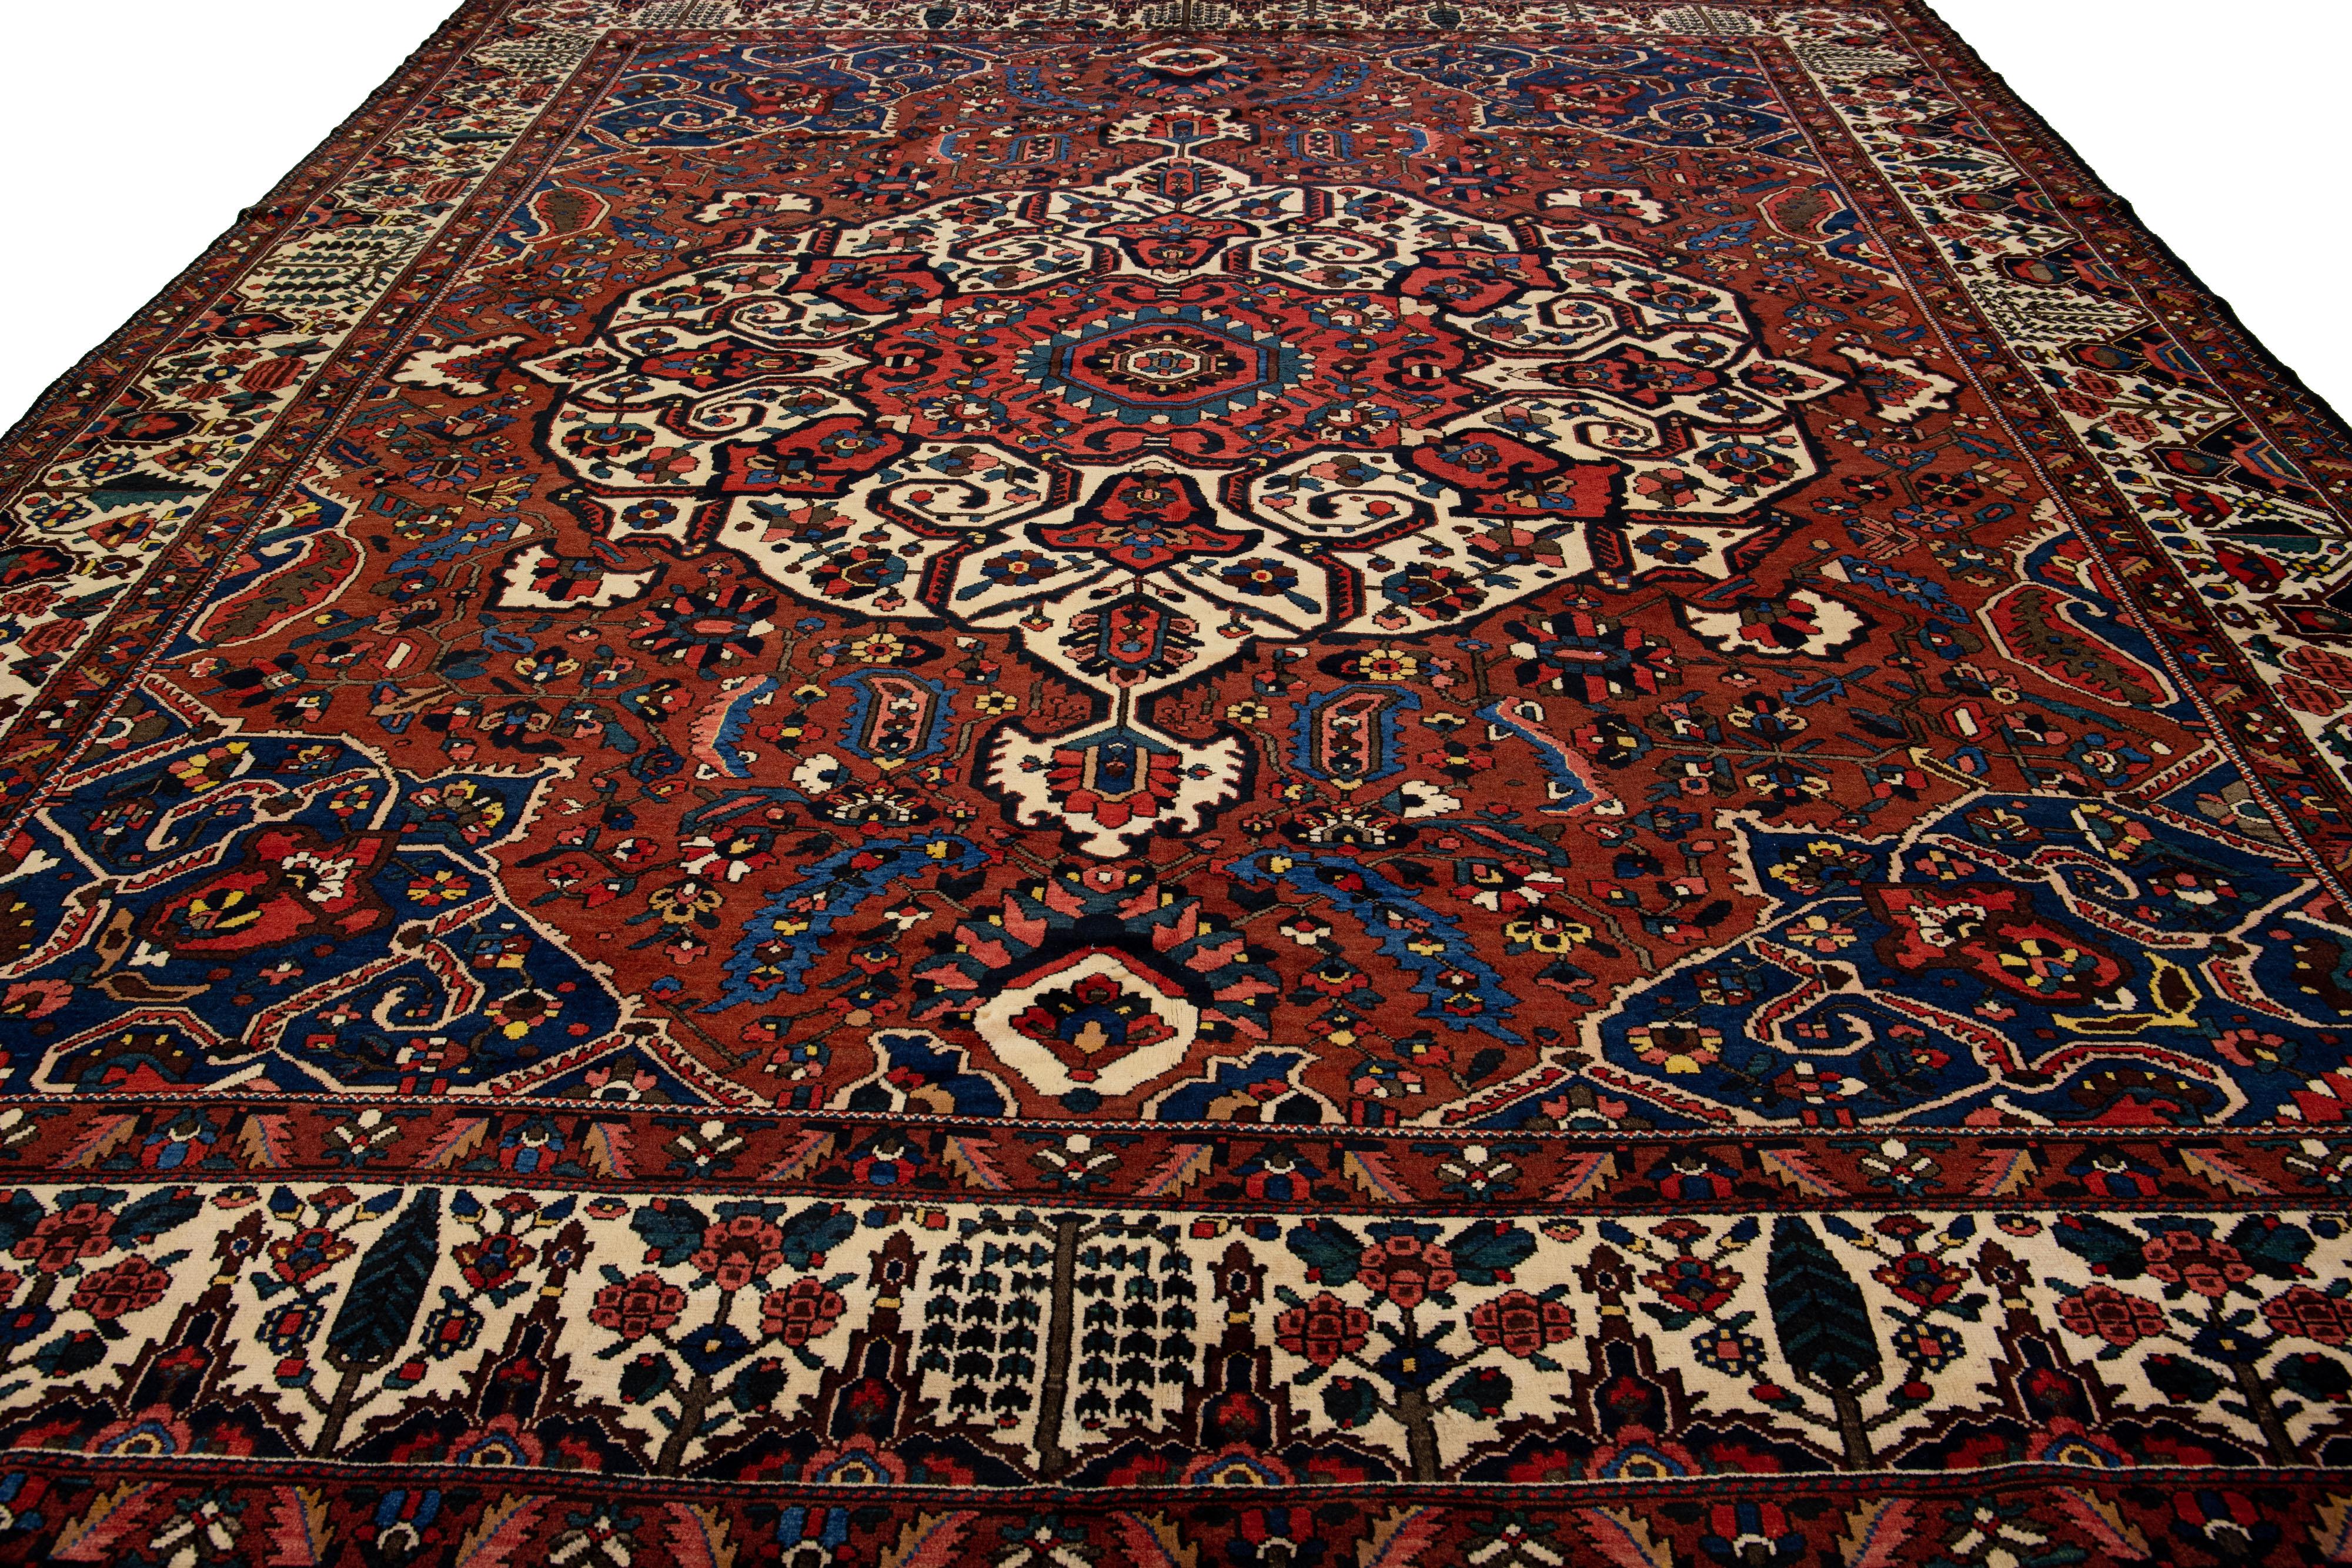 Beautiful Antique Bakhtiari hand-knotted wool rug with a red field. This Persian piece has an all-over multicolor accent in a gorgeous classic Medallion motif.

This rug measures 13'1